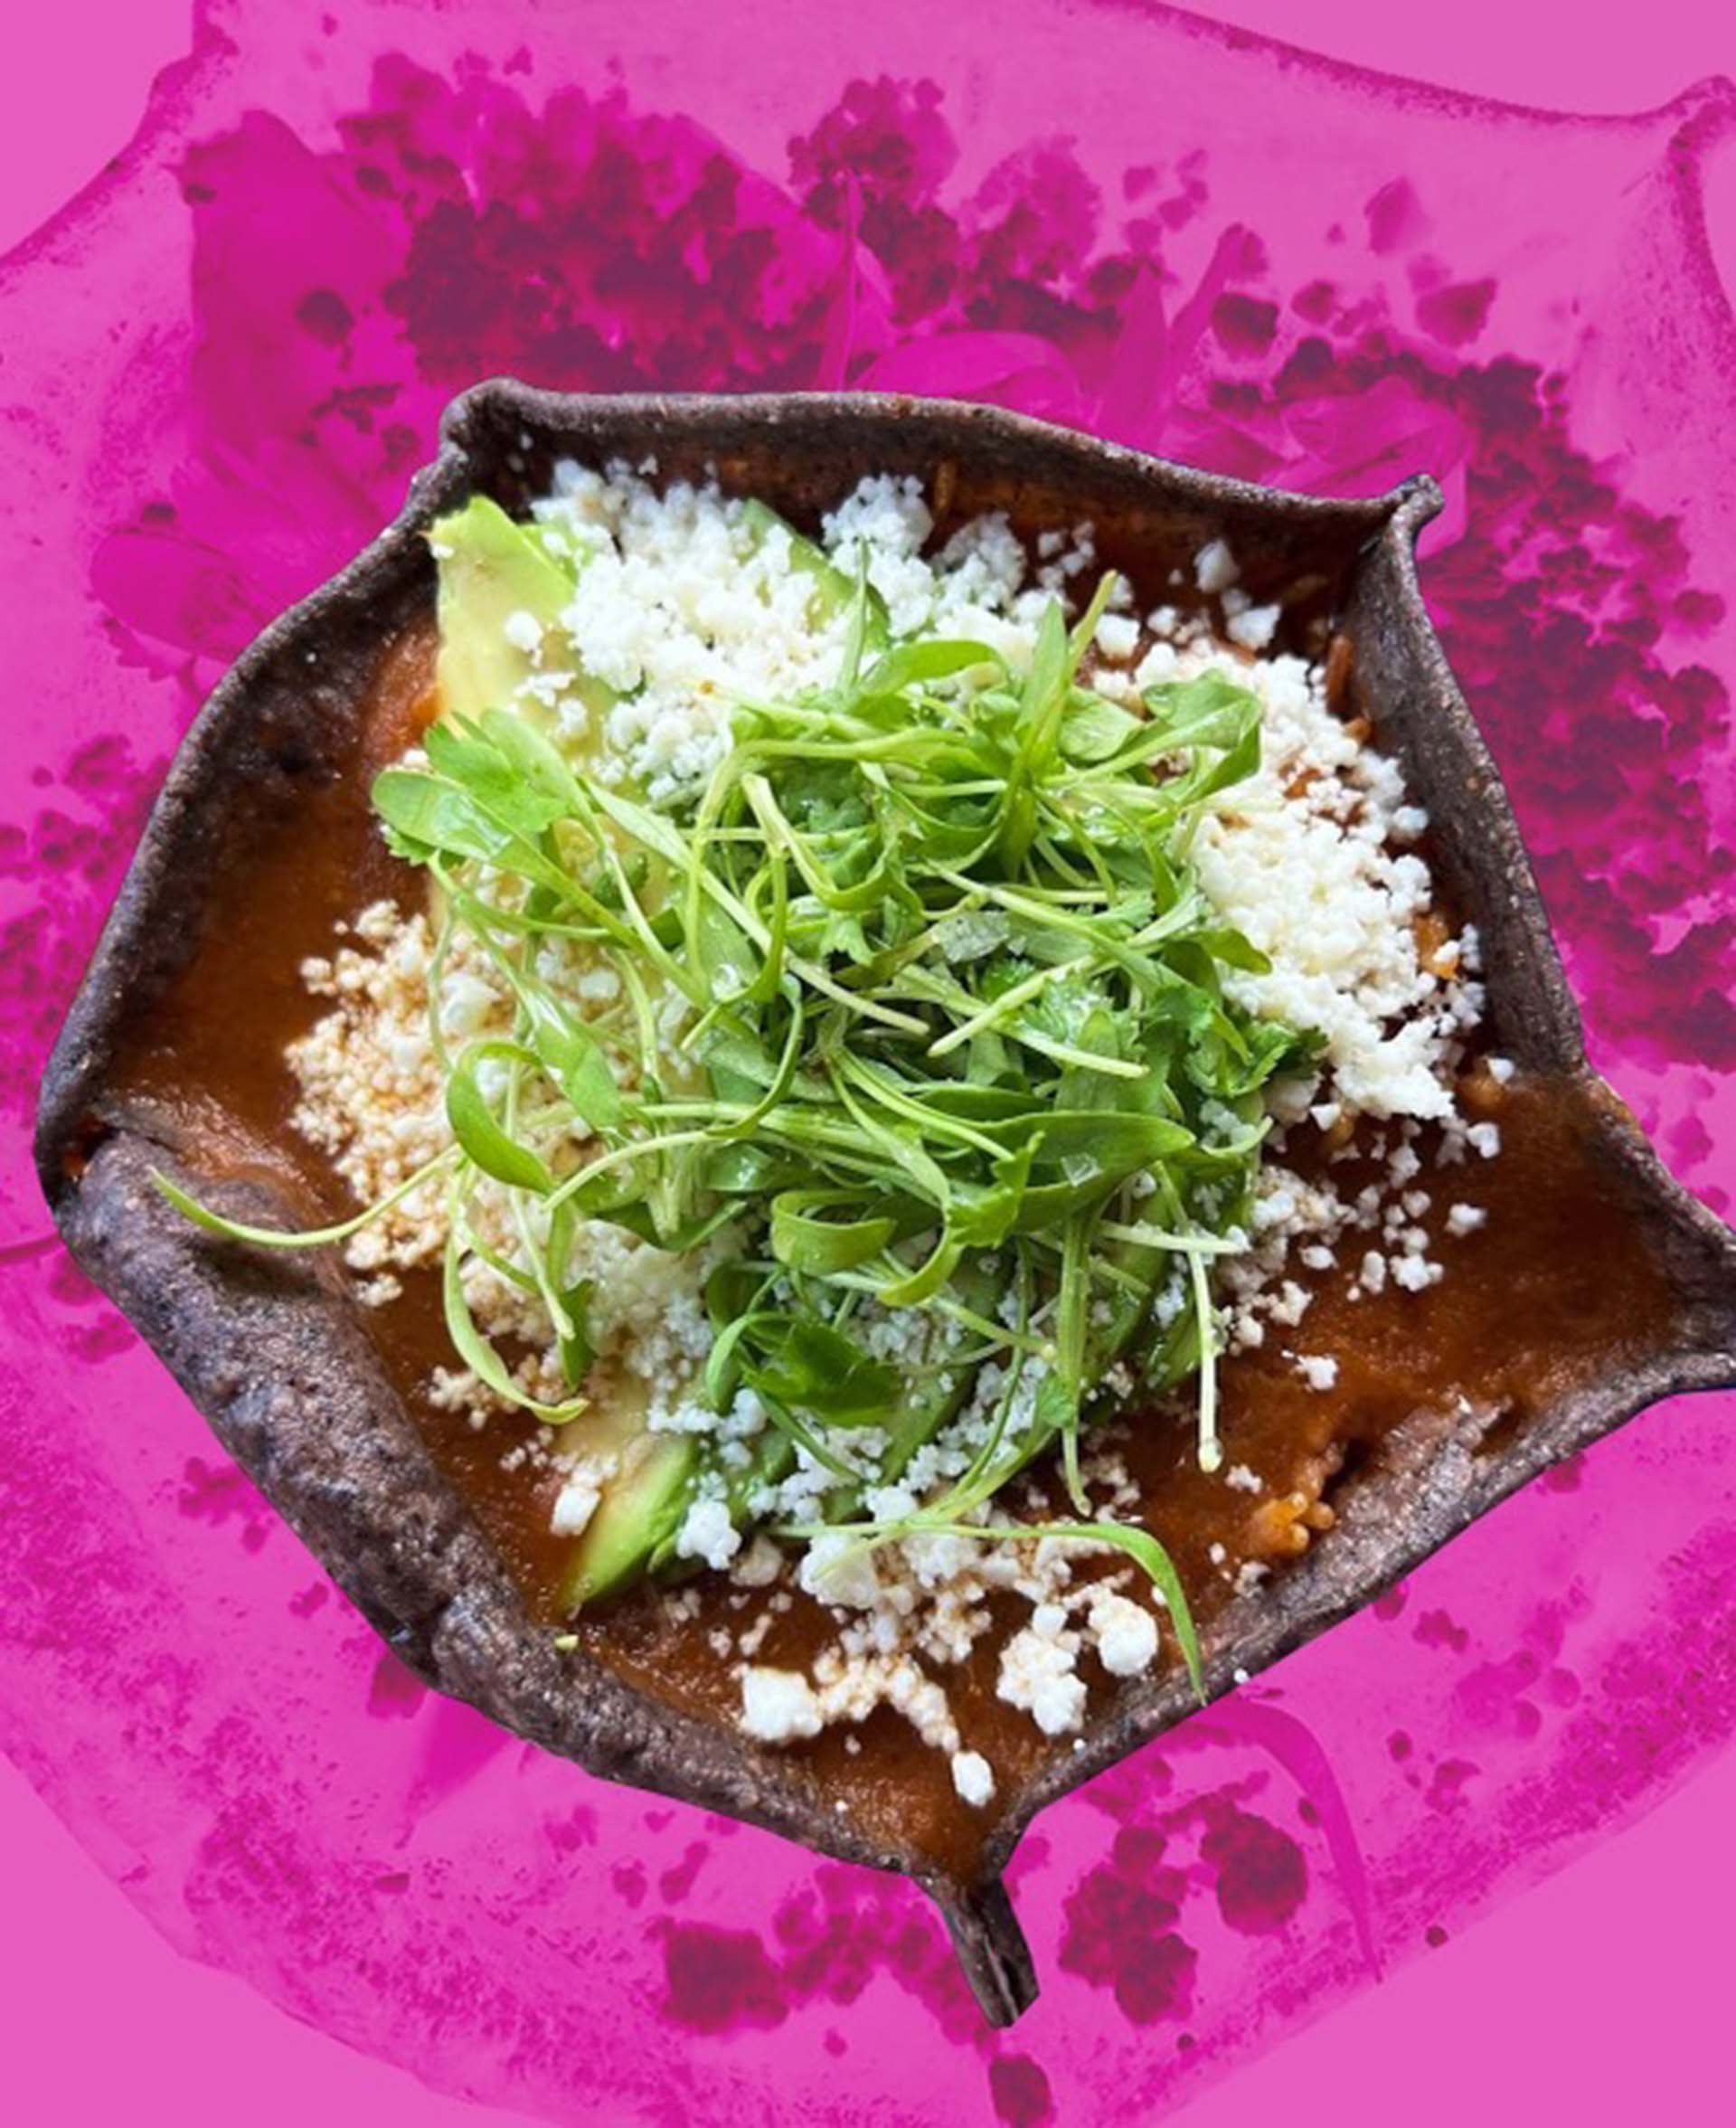 filled with Mexican soup presented against a bright pink backdrop